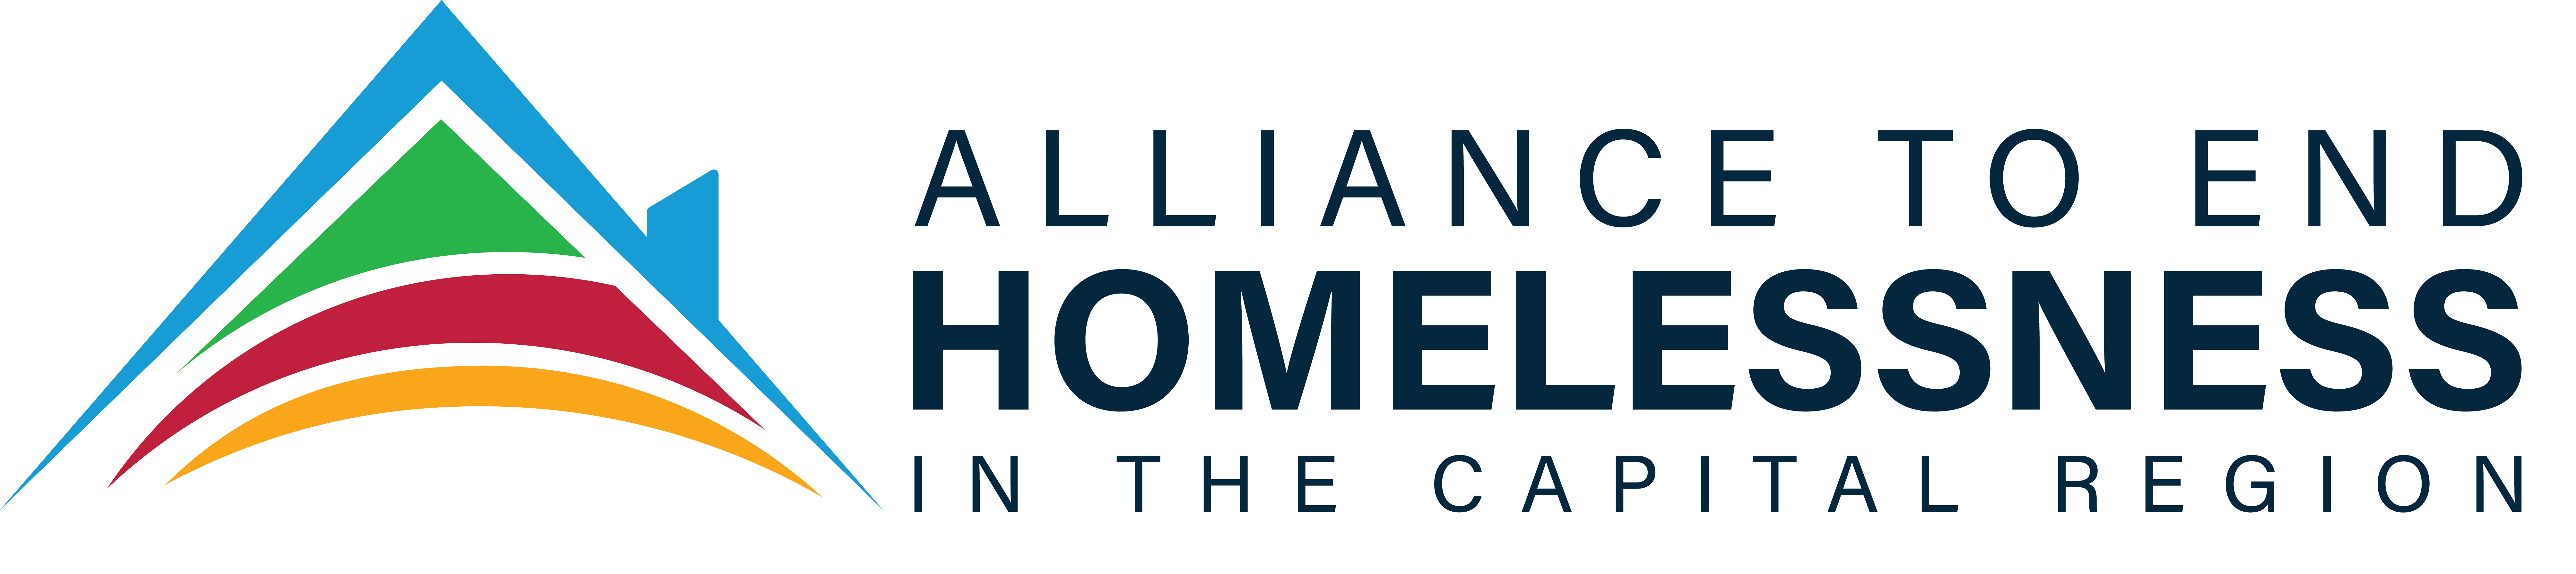 Alliance to End Homelessness 